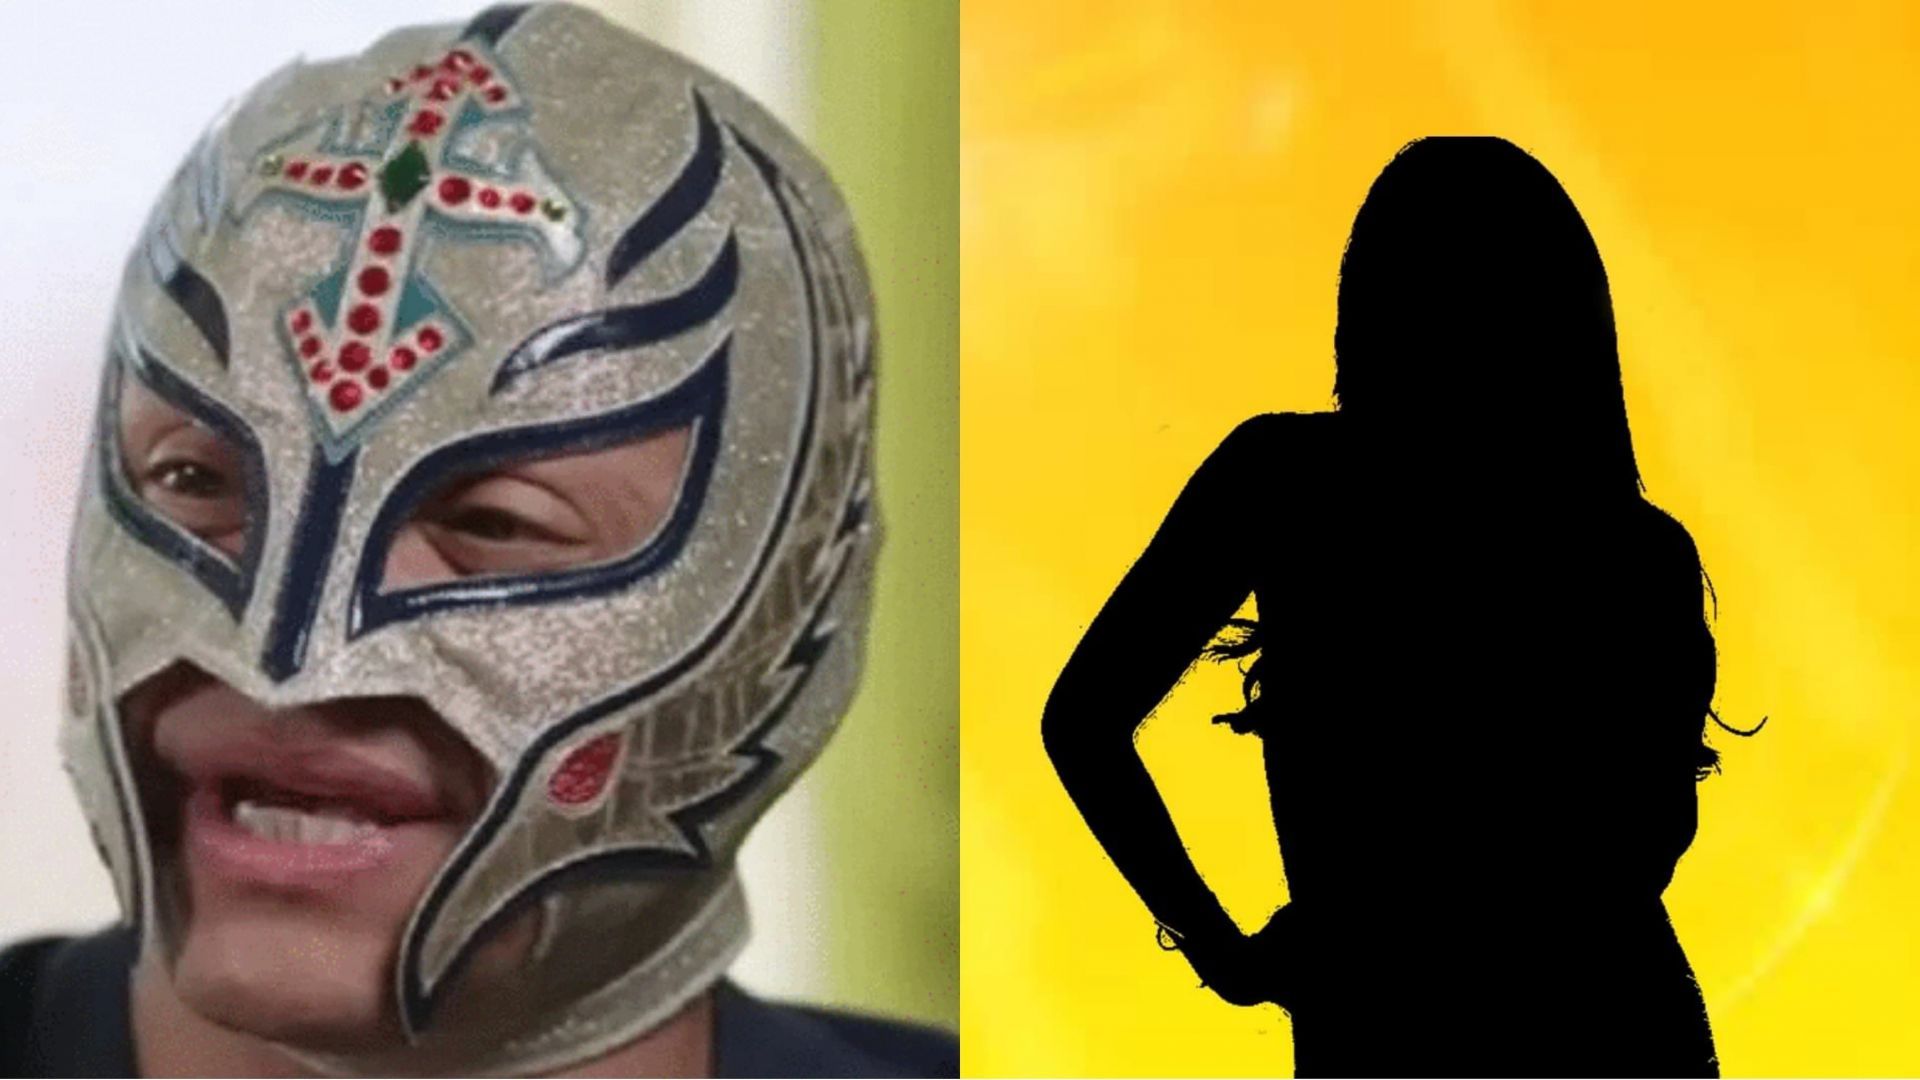 Mysterio has worked for WWE for 20 years.